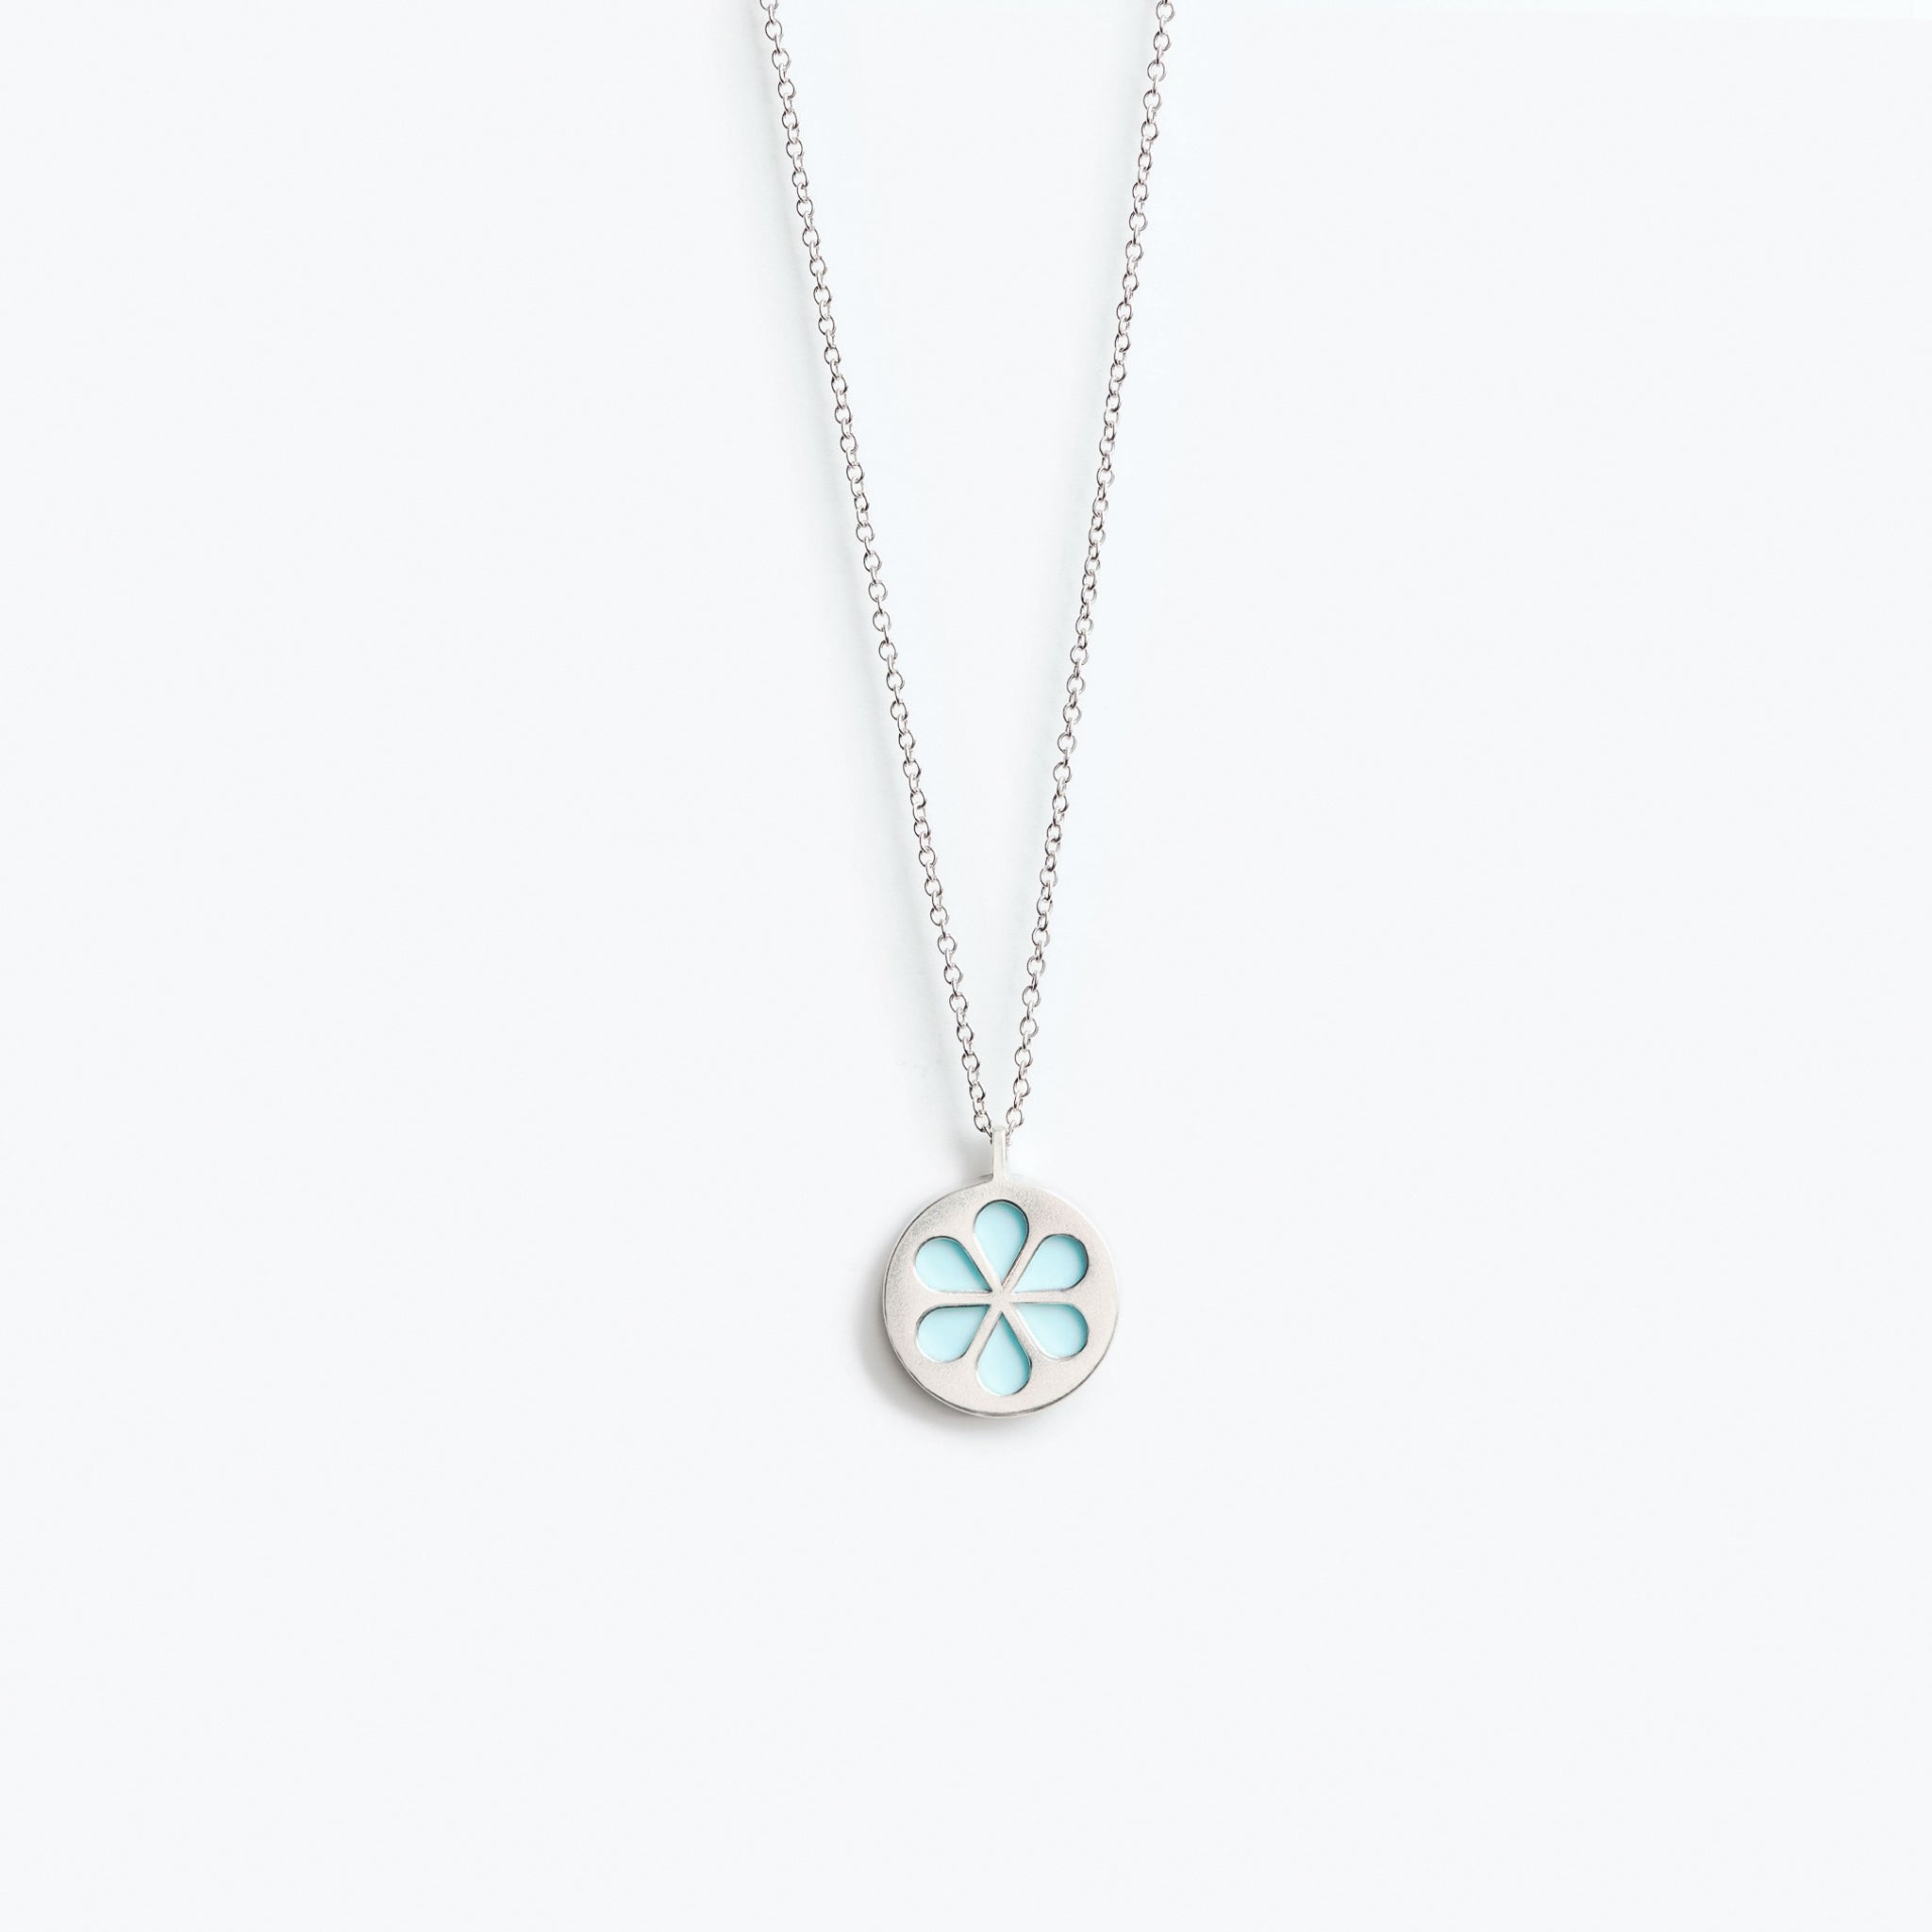 A simple pale turquoise flower pendant necklace, mounted on a fine trace chain.